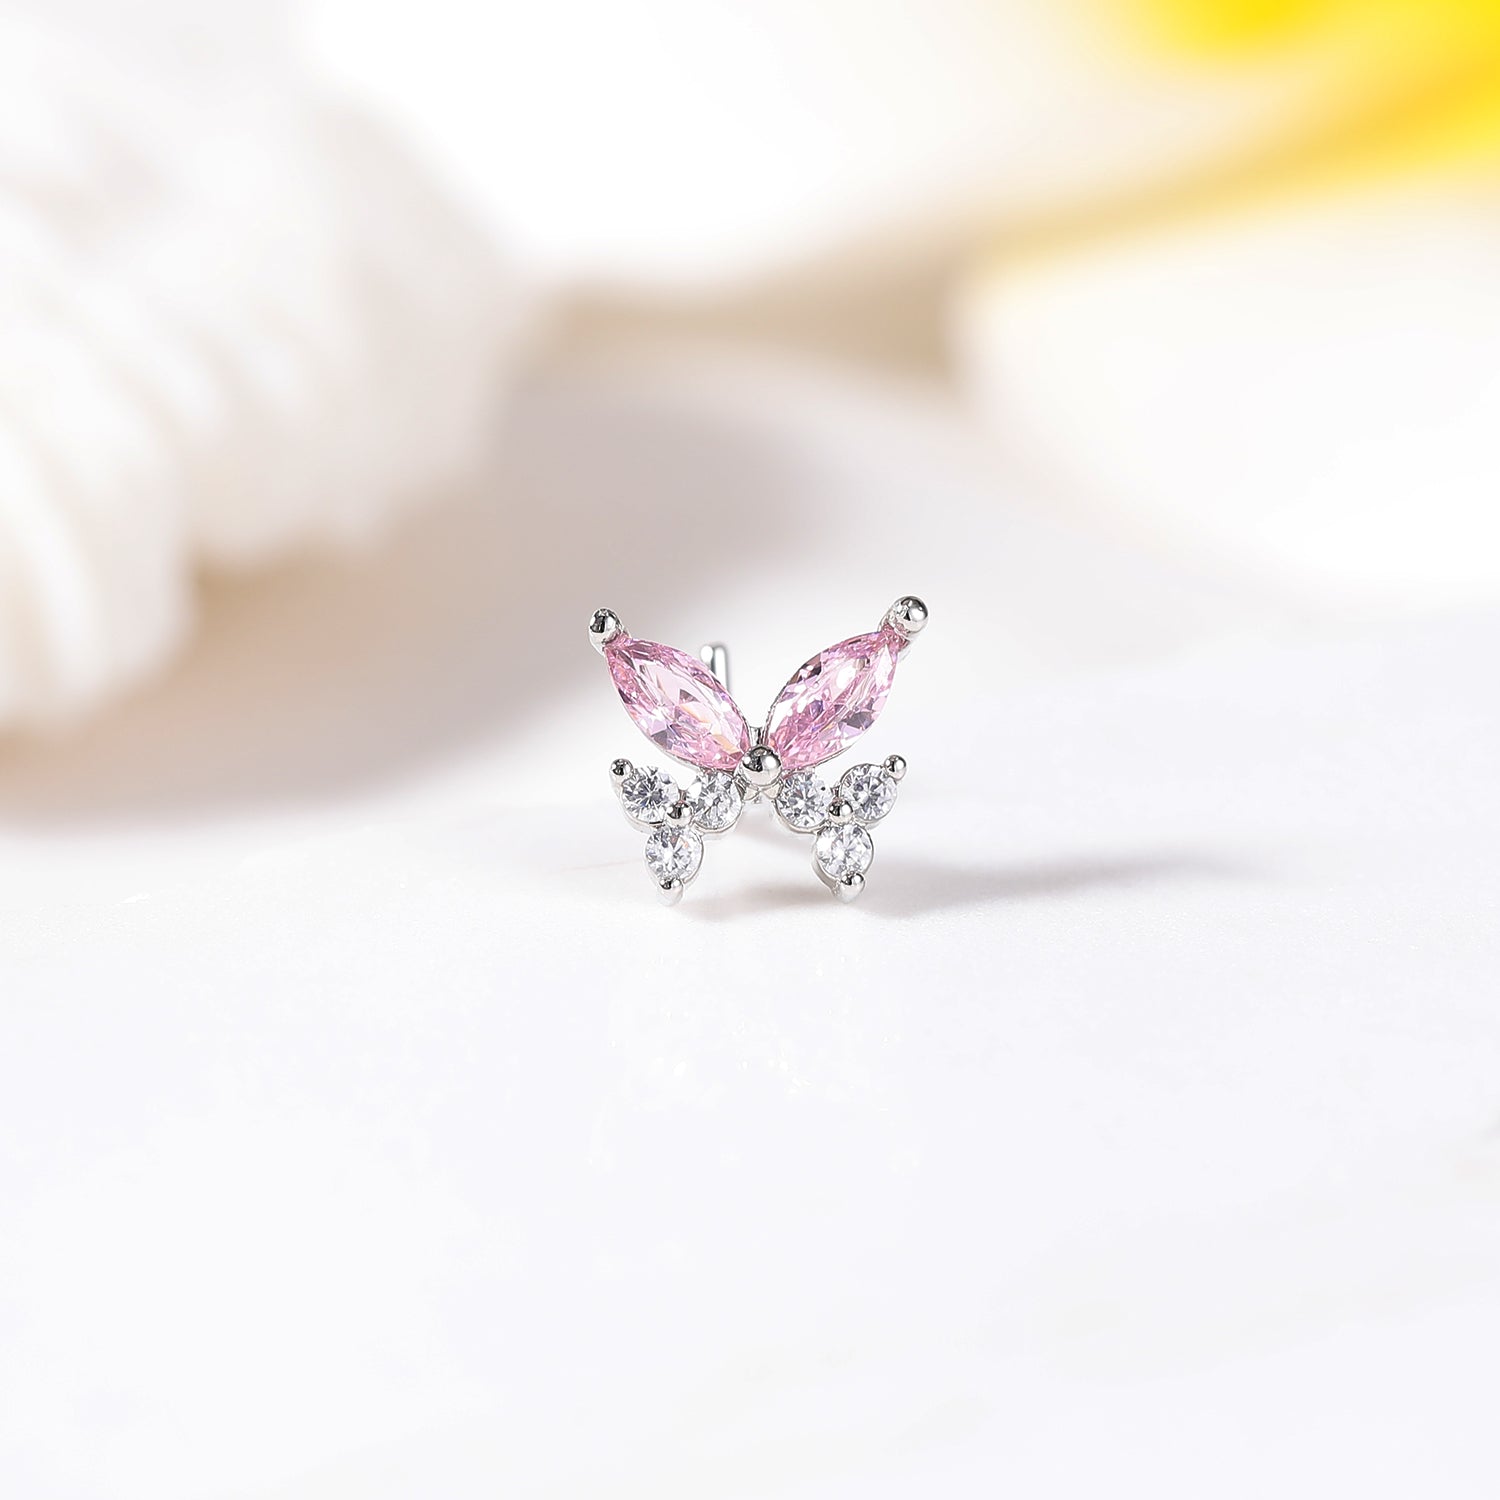 20g-copper-butterfly-nose-stud-piercing-l-shaped-nostril-piercing-pink-crystal-nose-ring